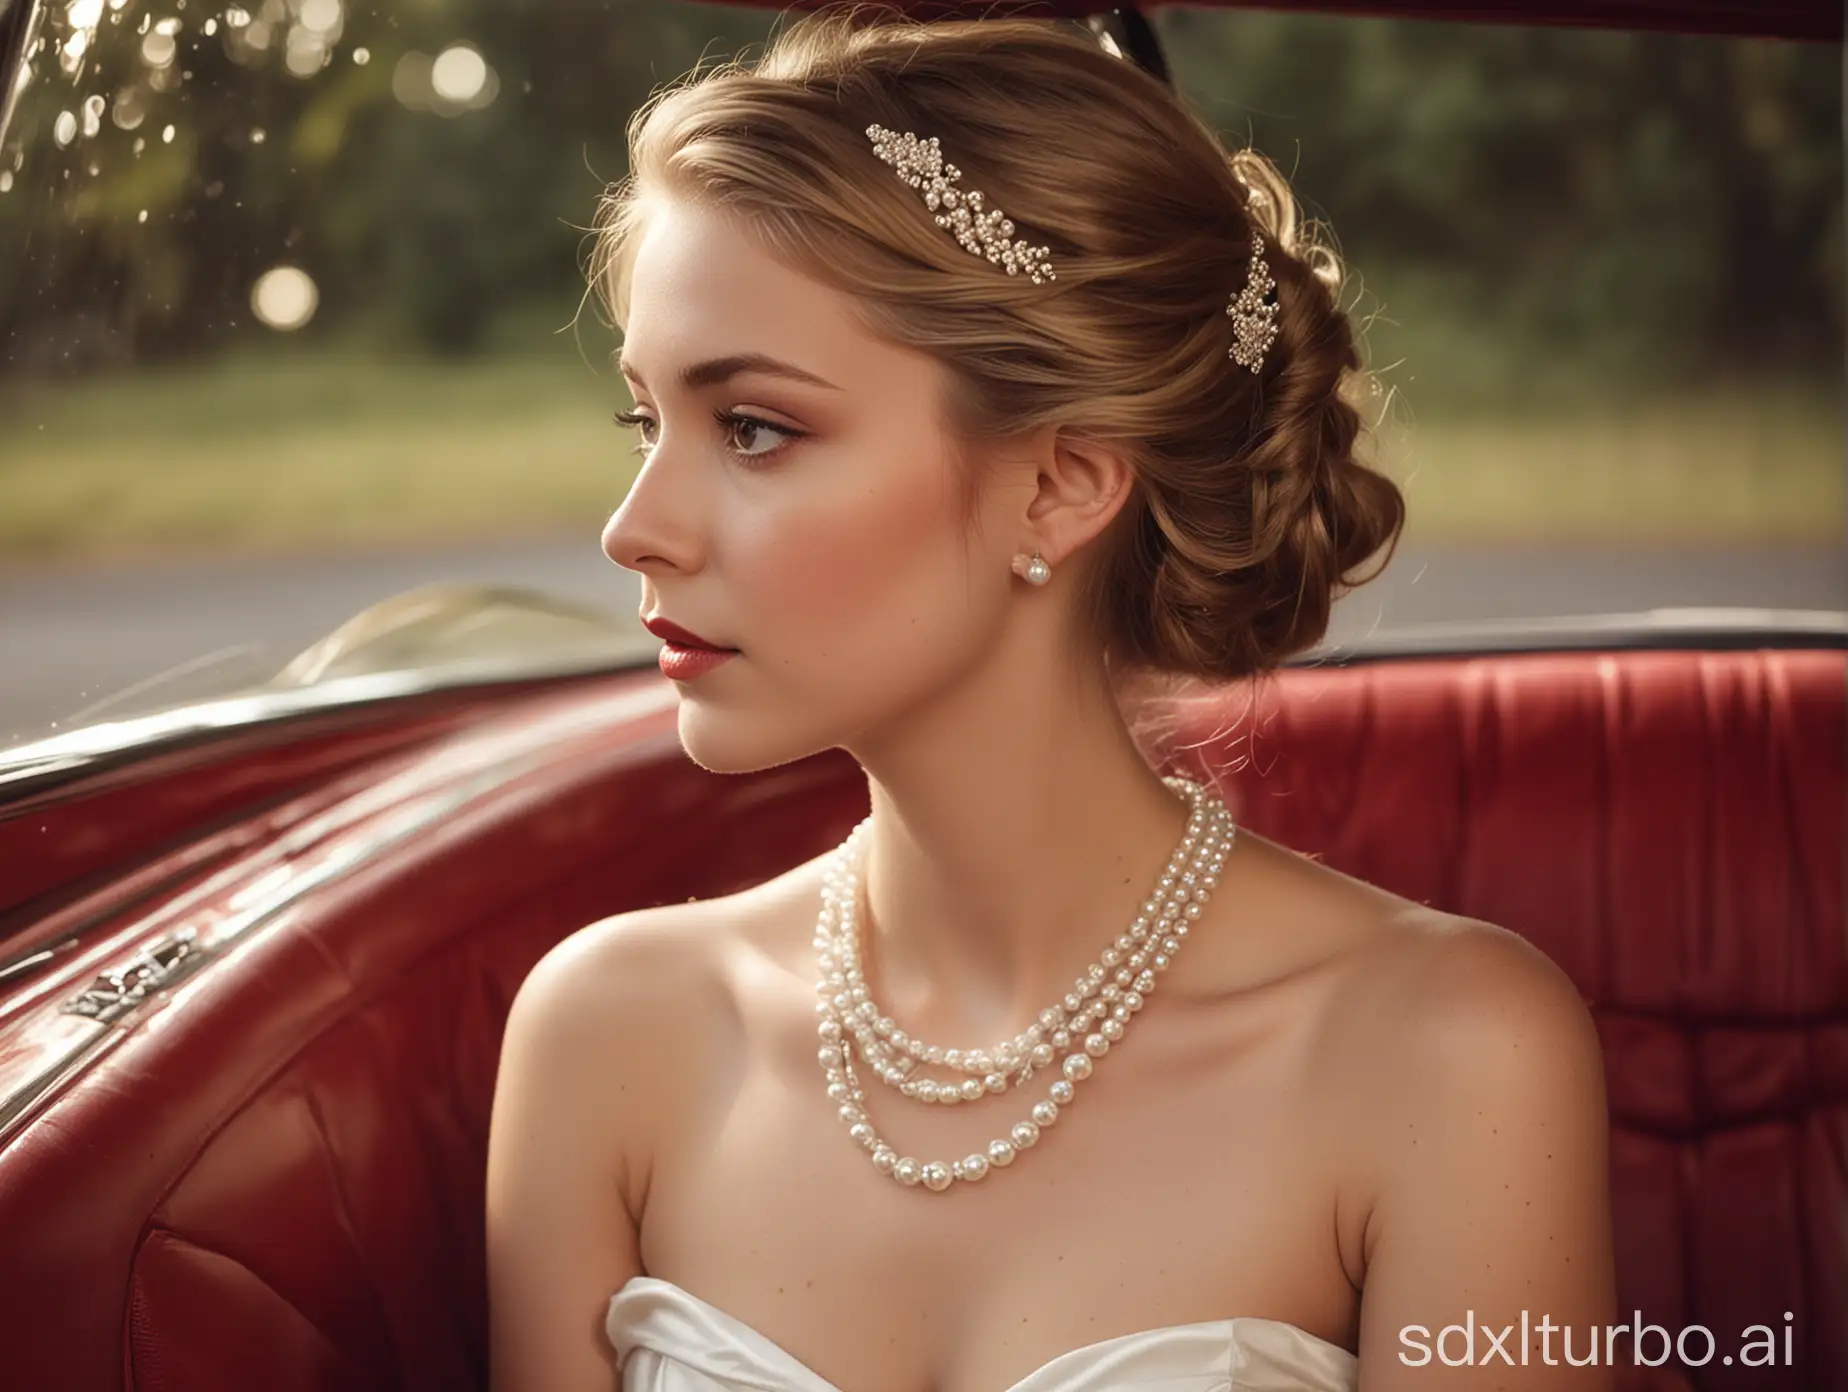 A captivating vintage-inspired image featuring a sophisticated girl seated in a charming red car. The girl, with an updo adorned by a pearl hair accessory, offers a profile view, displaying her serene and introspective expression. Her white satin or silk dress and multi-strand pearl necklace add a touch of classic elegance. The car's interior is pristine white, creating a striking contrast against the soft, warm lighting that enhances the colors and textures within the frame.